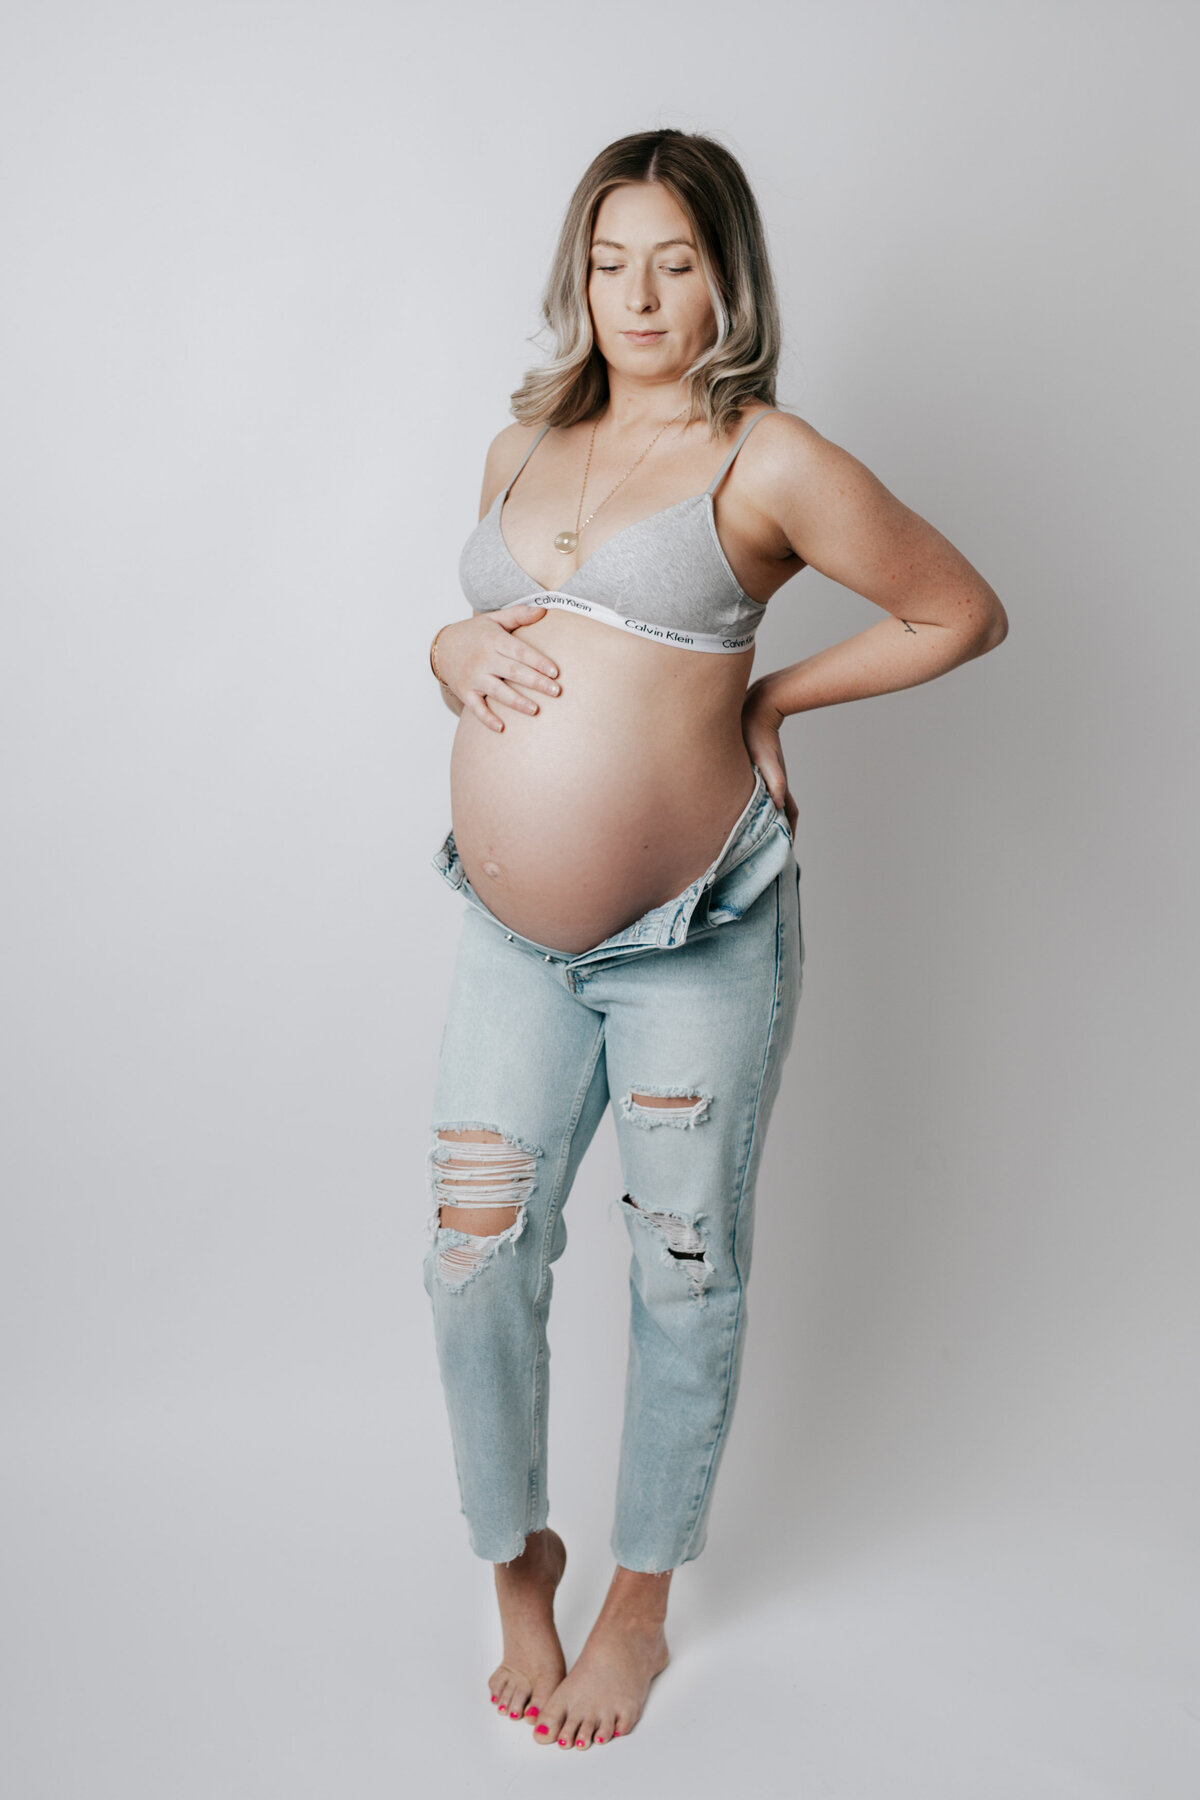 Studio Maternity session in Exeter, Ontario photography studio - mom in distressed ripped jeans unzipped exposing her baby bump. Mom is wearing a grey bralette and smiling at her bump against a white backdrop.